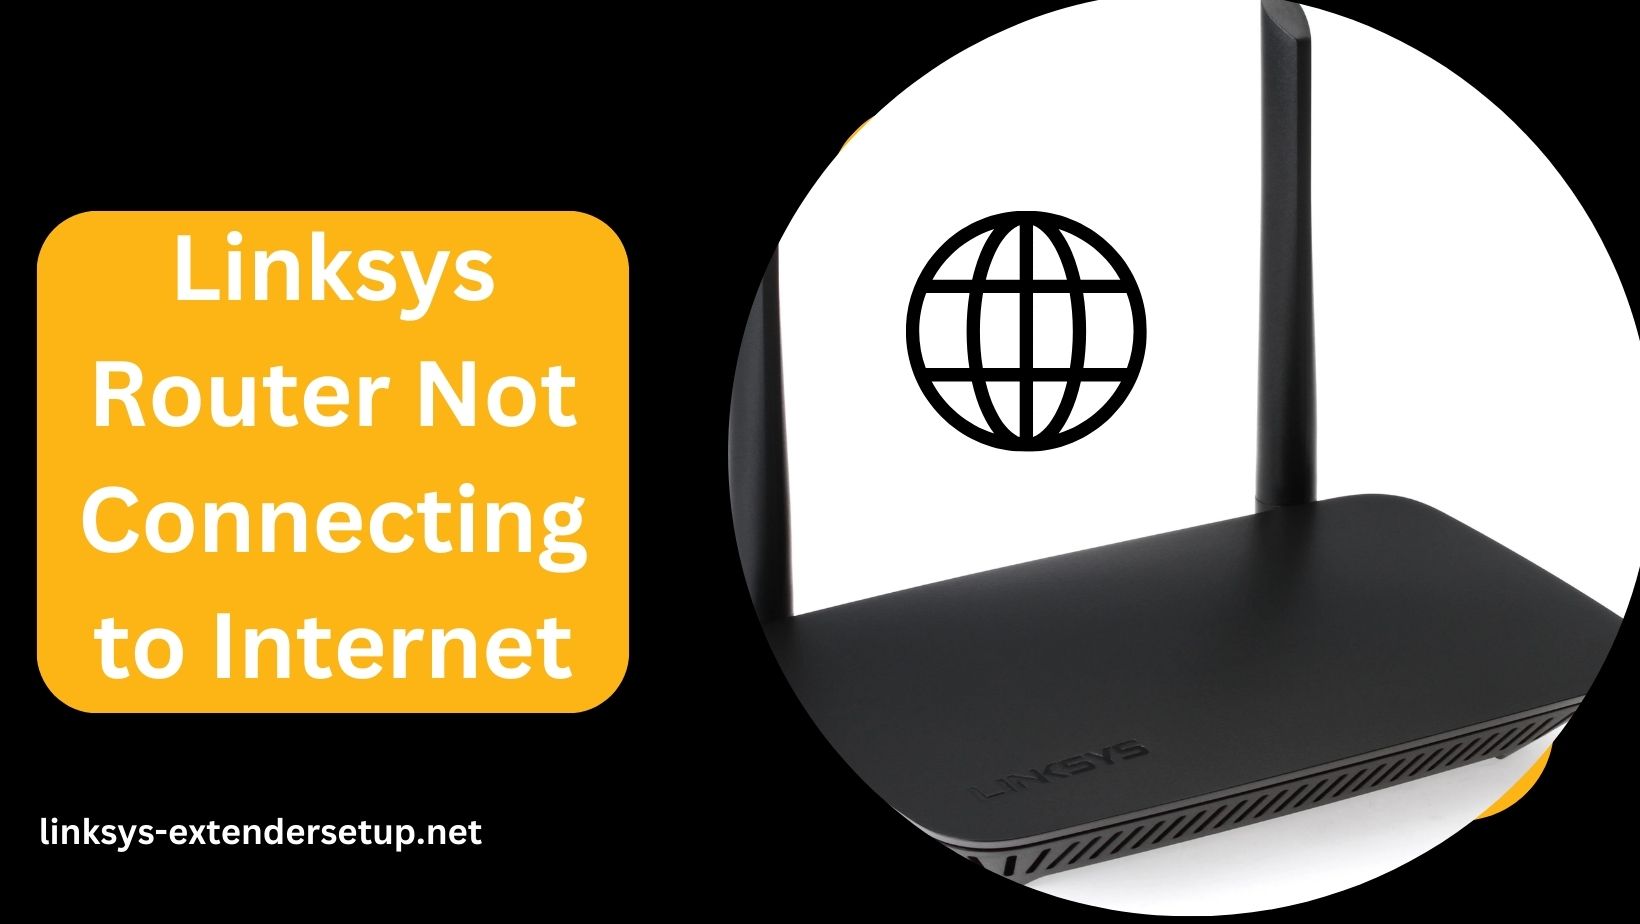 You are currently viewing Linksys Router Not Connecting to Internet how to resolve?